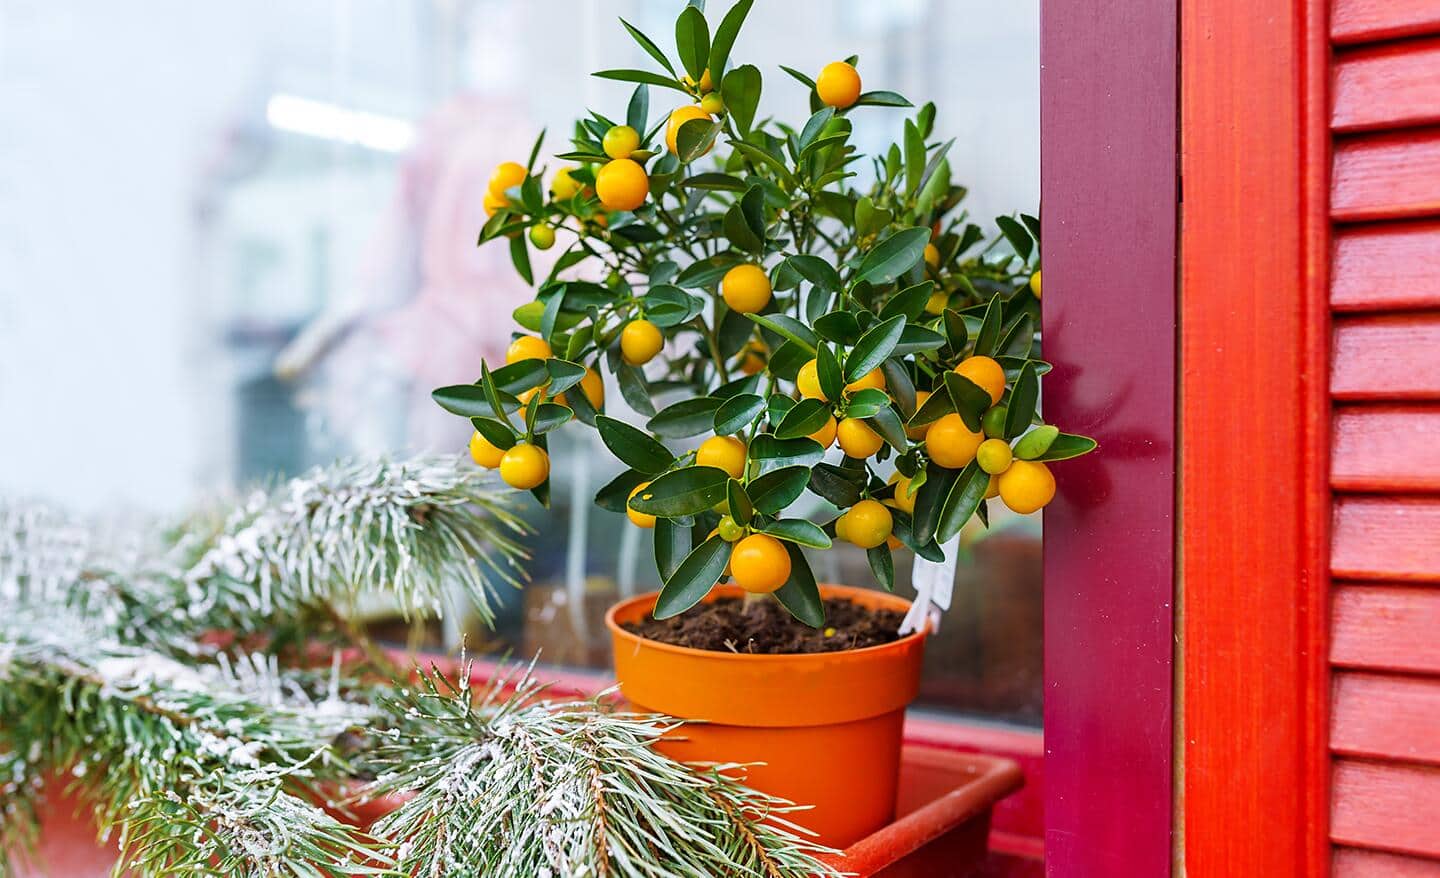 A citrus tree loaded with lemons in a holiday setting